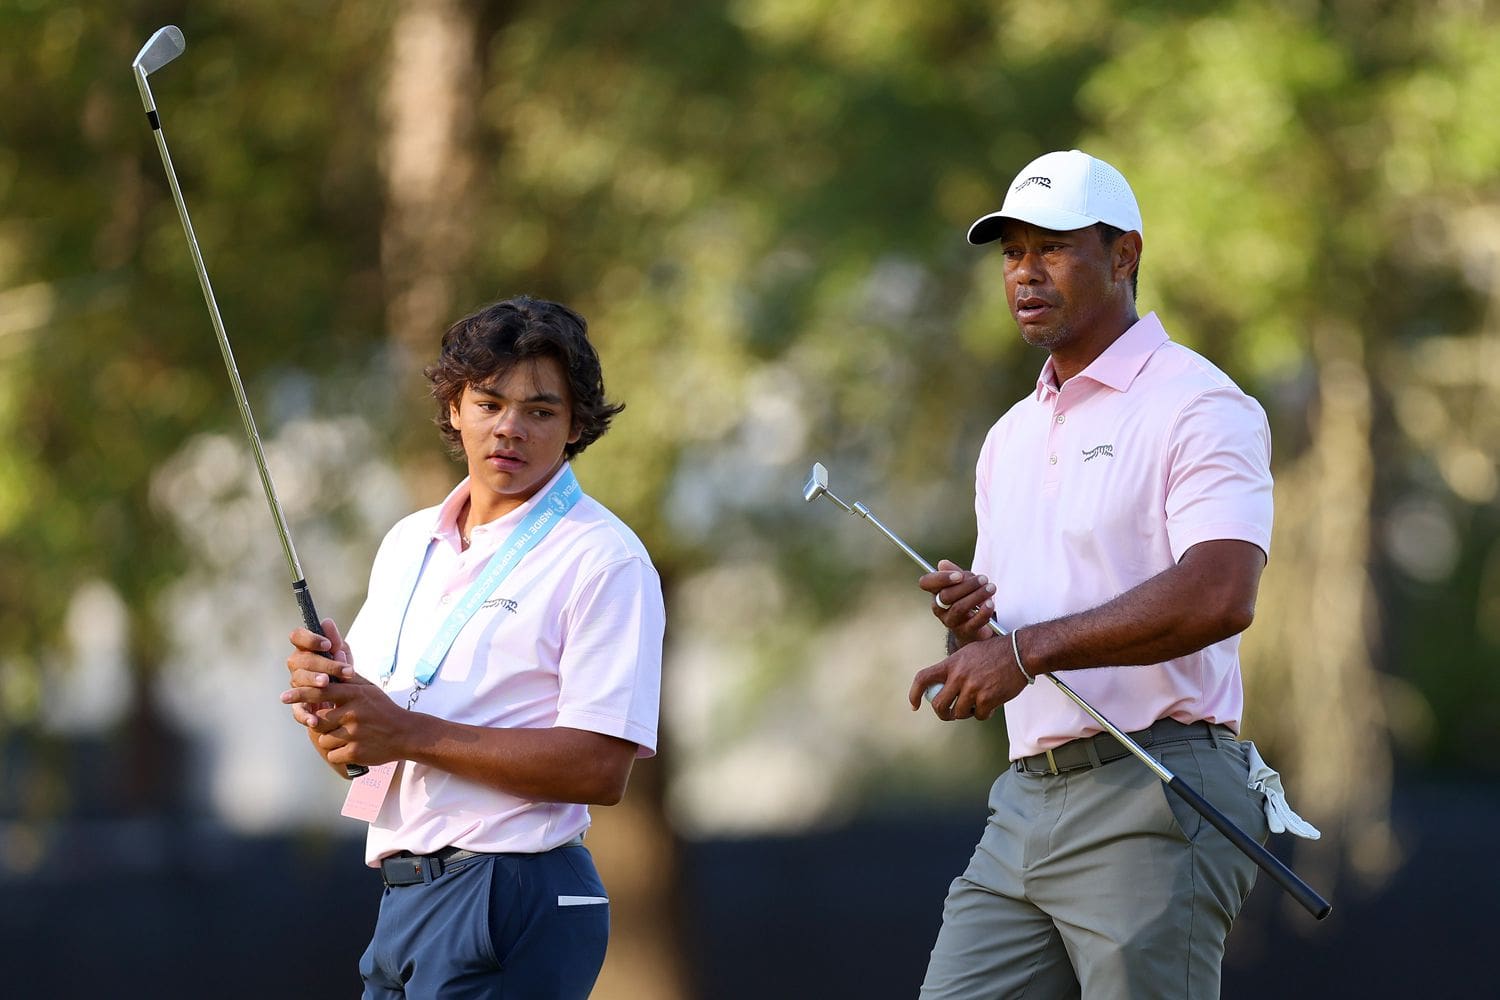 Tiger Woods’ Son Charlie Woods, 15, Qualifies for First USGA Championship: ‘I Want to Win’